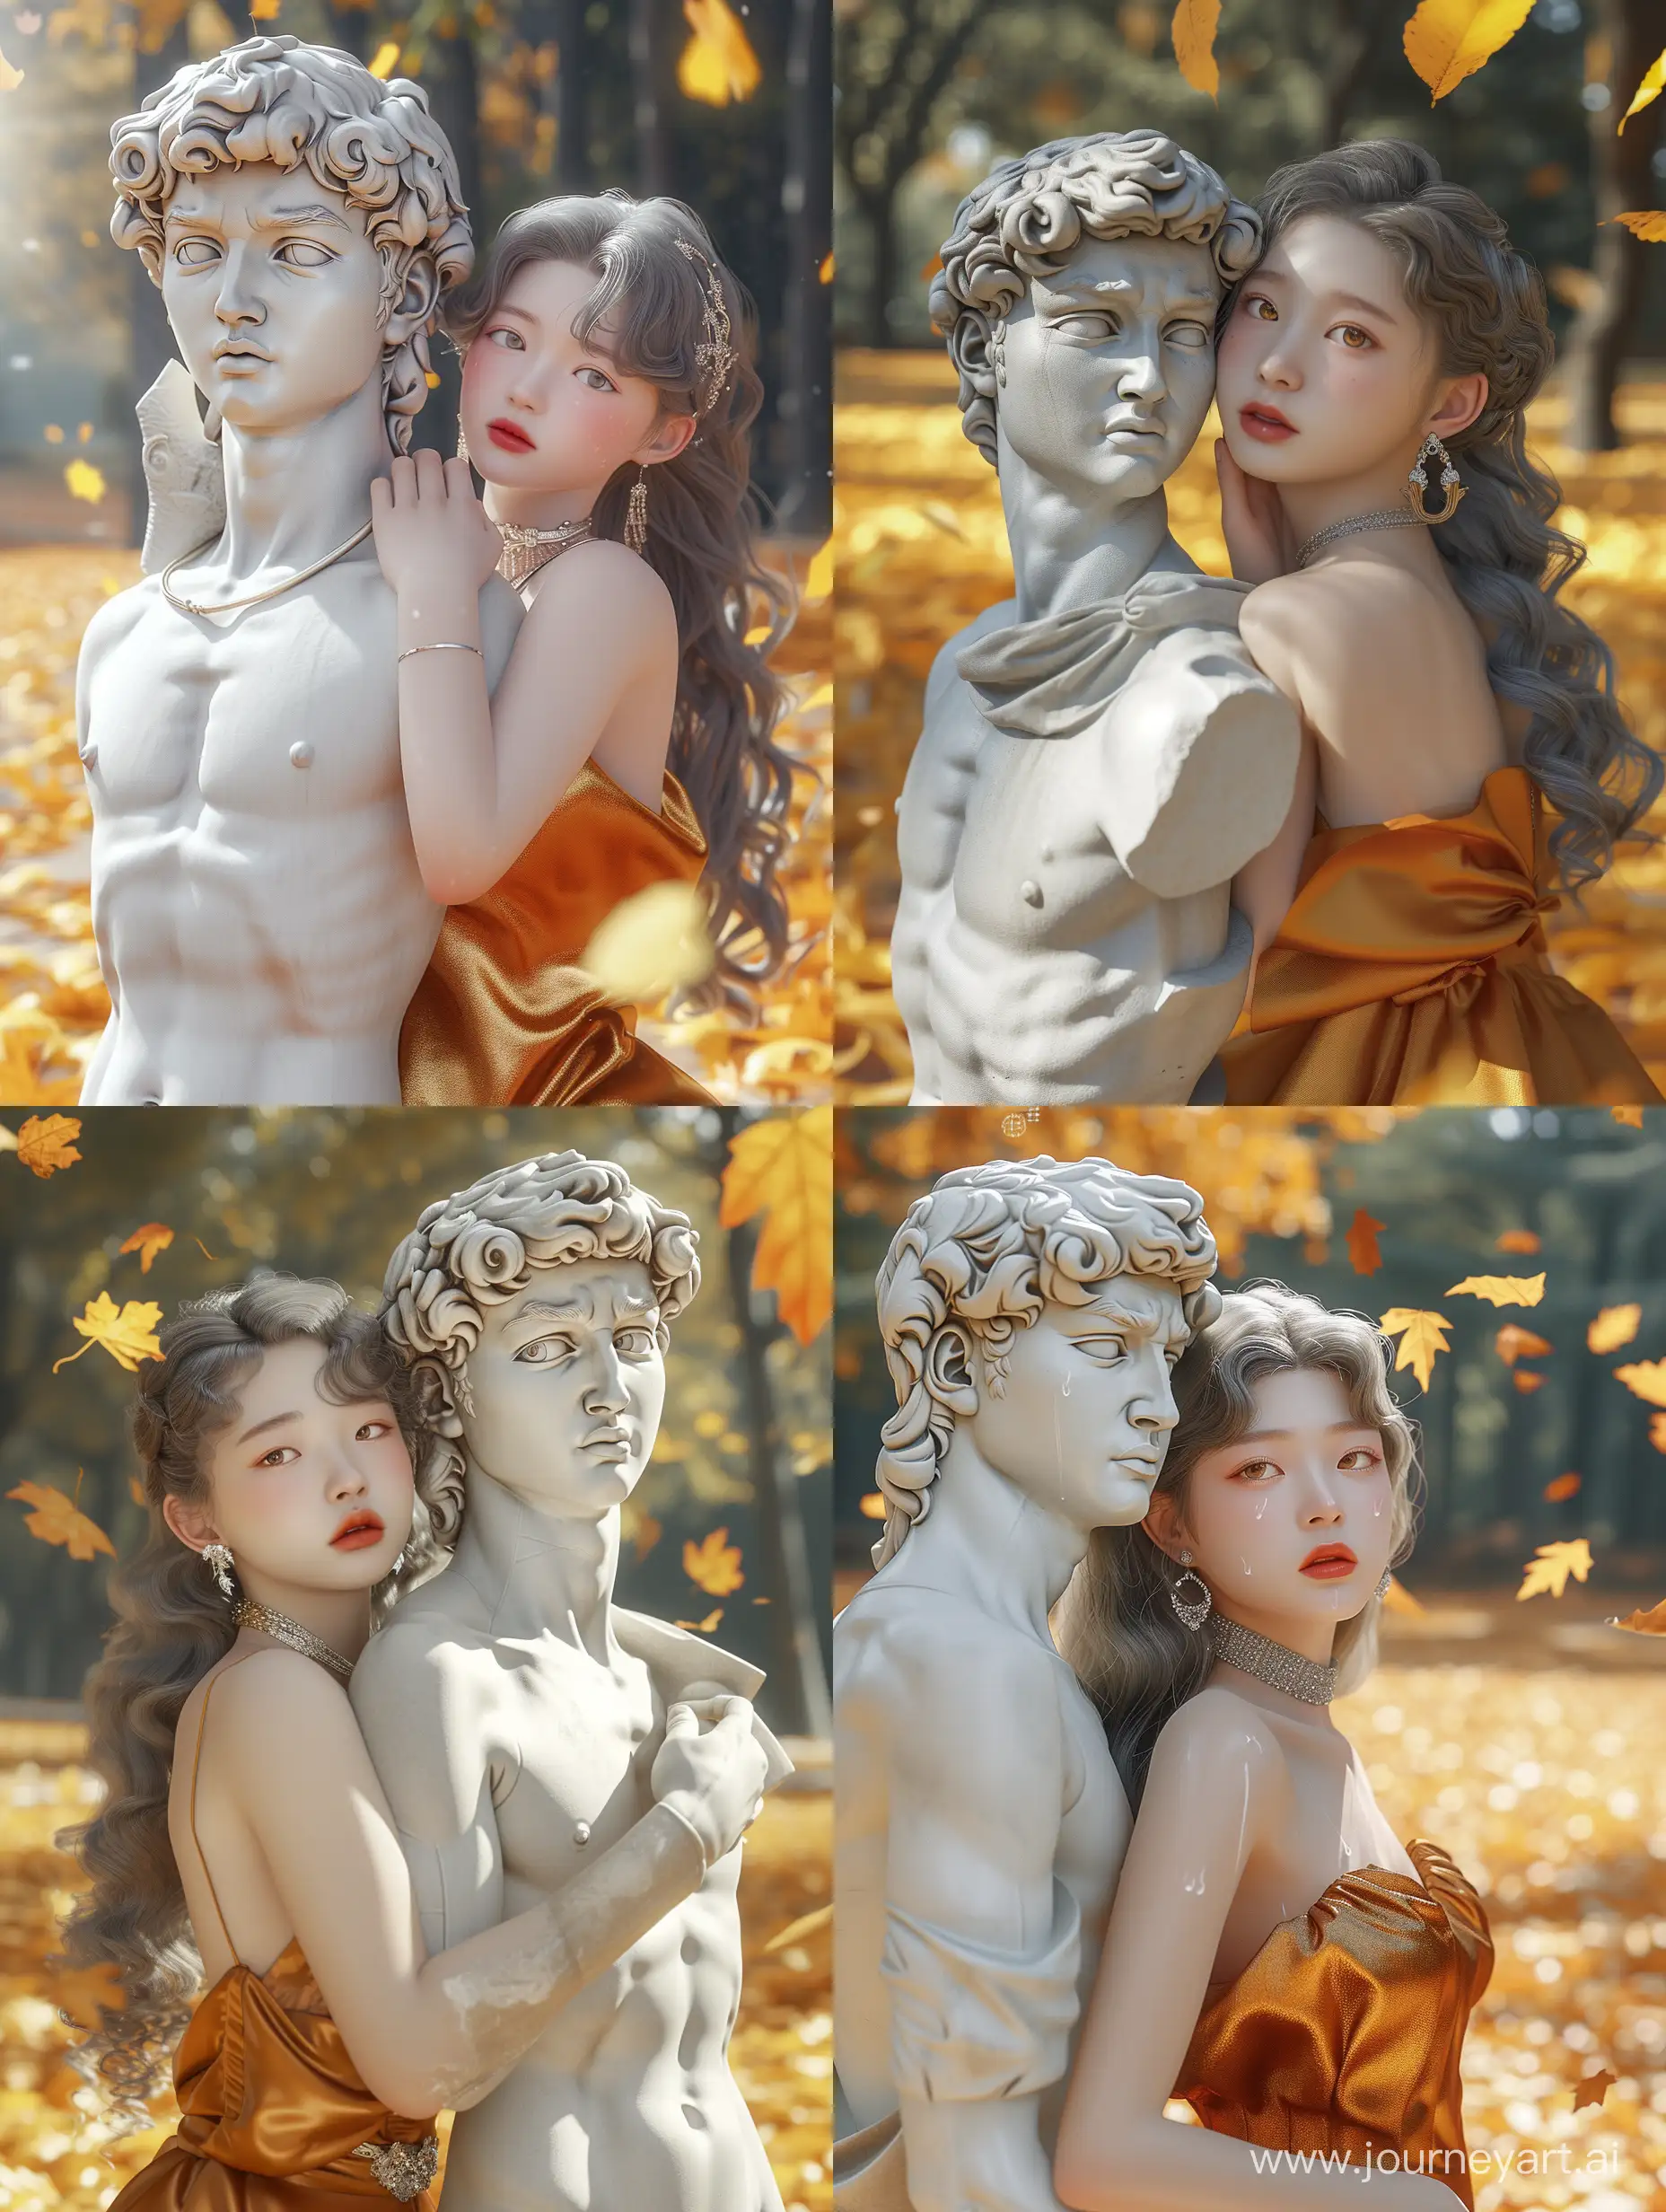 Graceful-Asian-Woman-Embracing-Stone-Statue-in-Shiny-Amber-Dress-amid-Autumn-Leaves